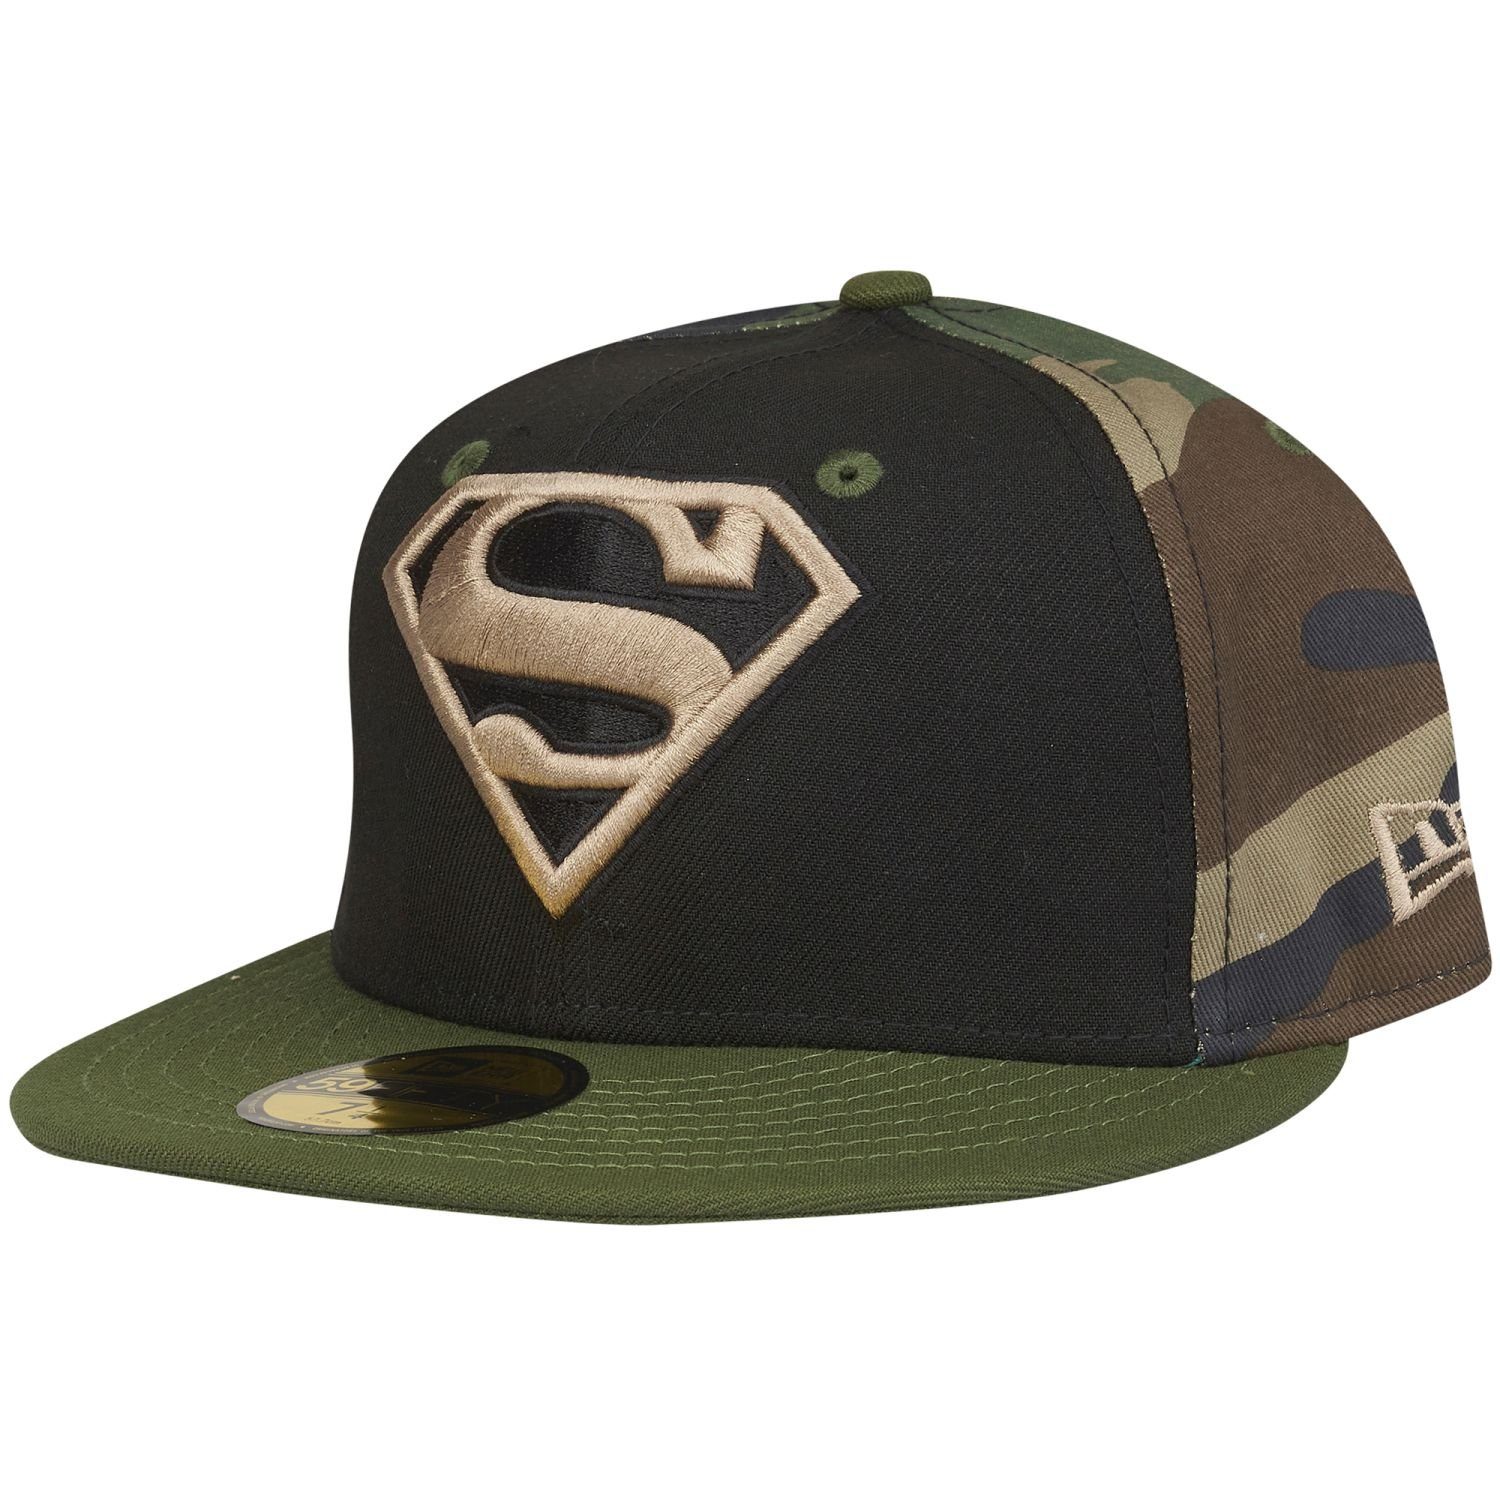 New Era Fitted Cap 59Fifty SUPERMAN woodland